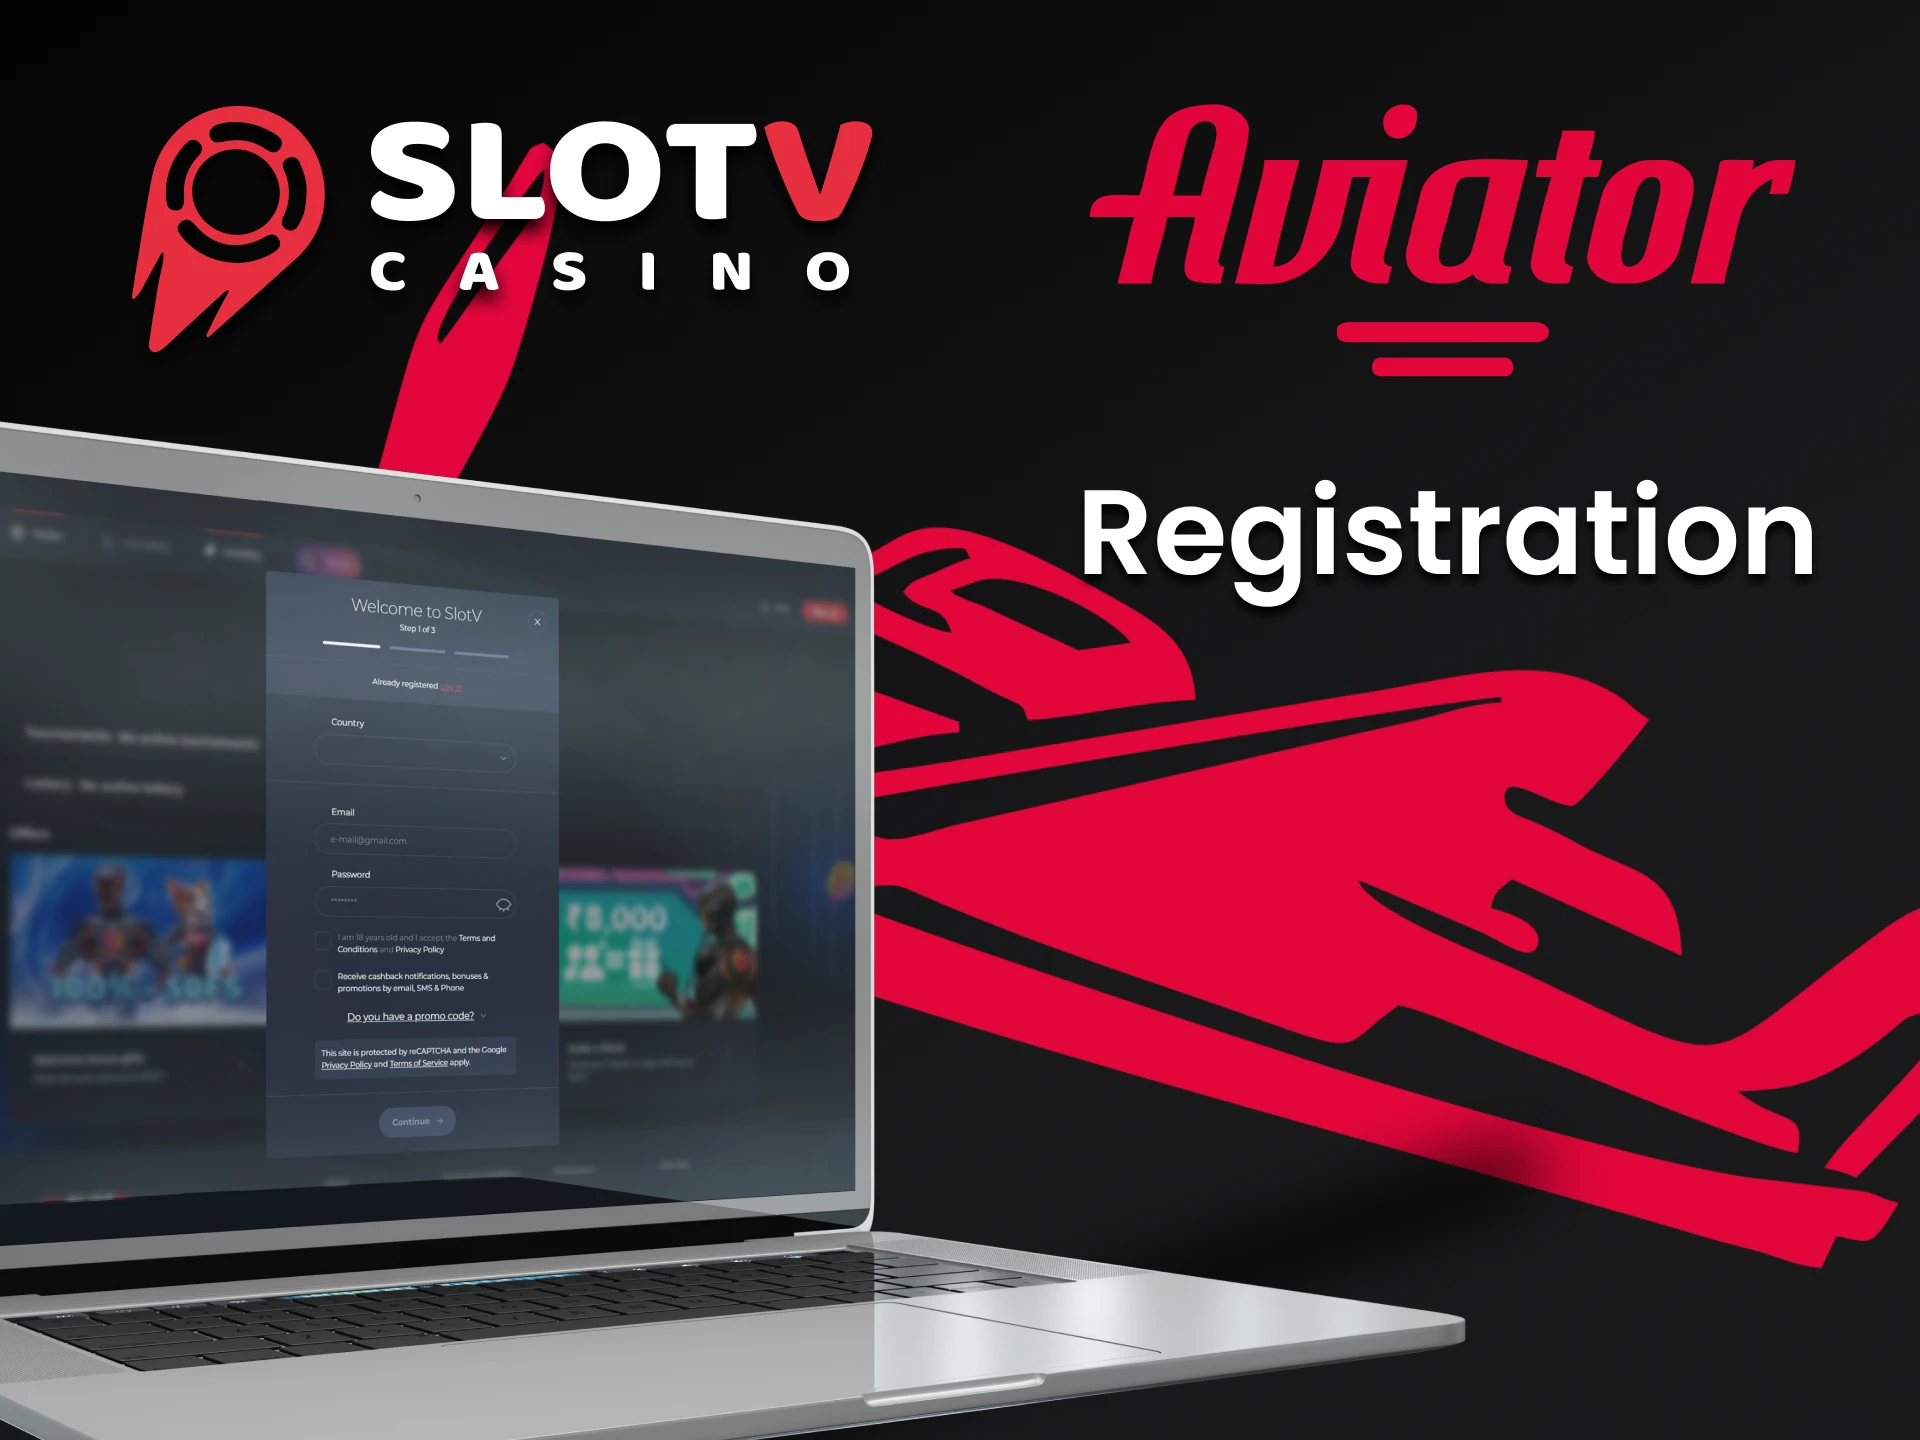 Sign up to SlotV to play Aviator.